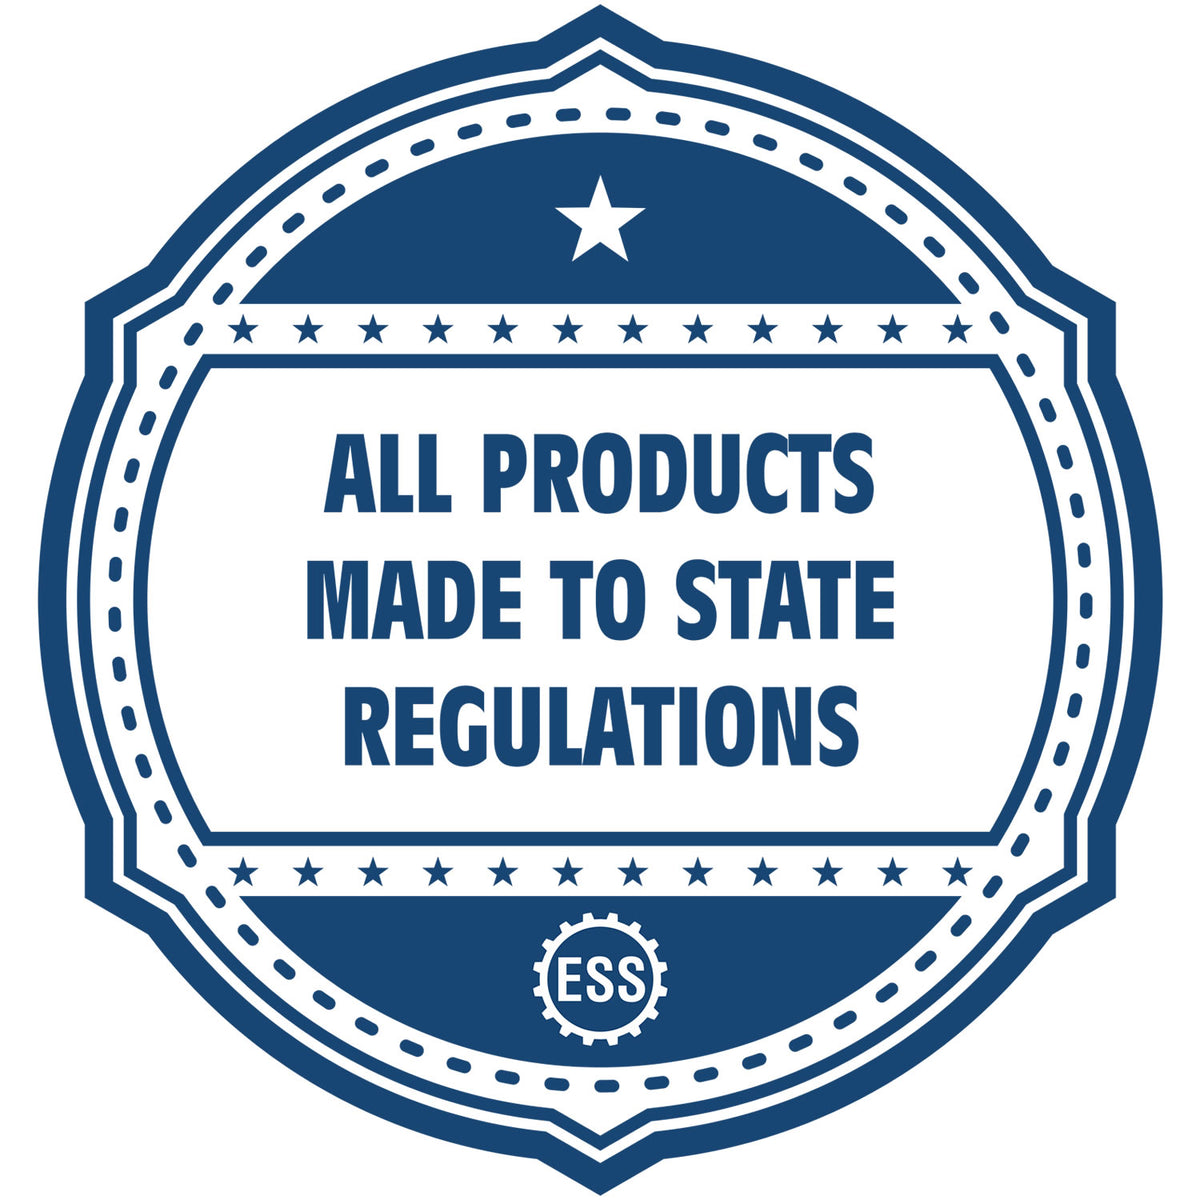 A blue icon or badge for the Self-Inking Florida Geologist Stamp showing that this product is made in compliance with state regulations.